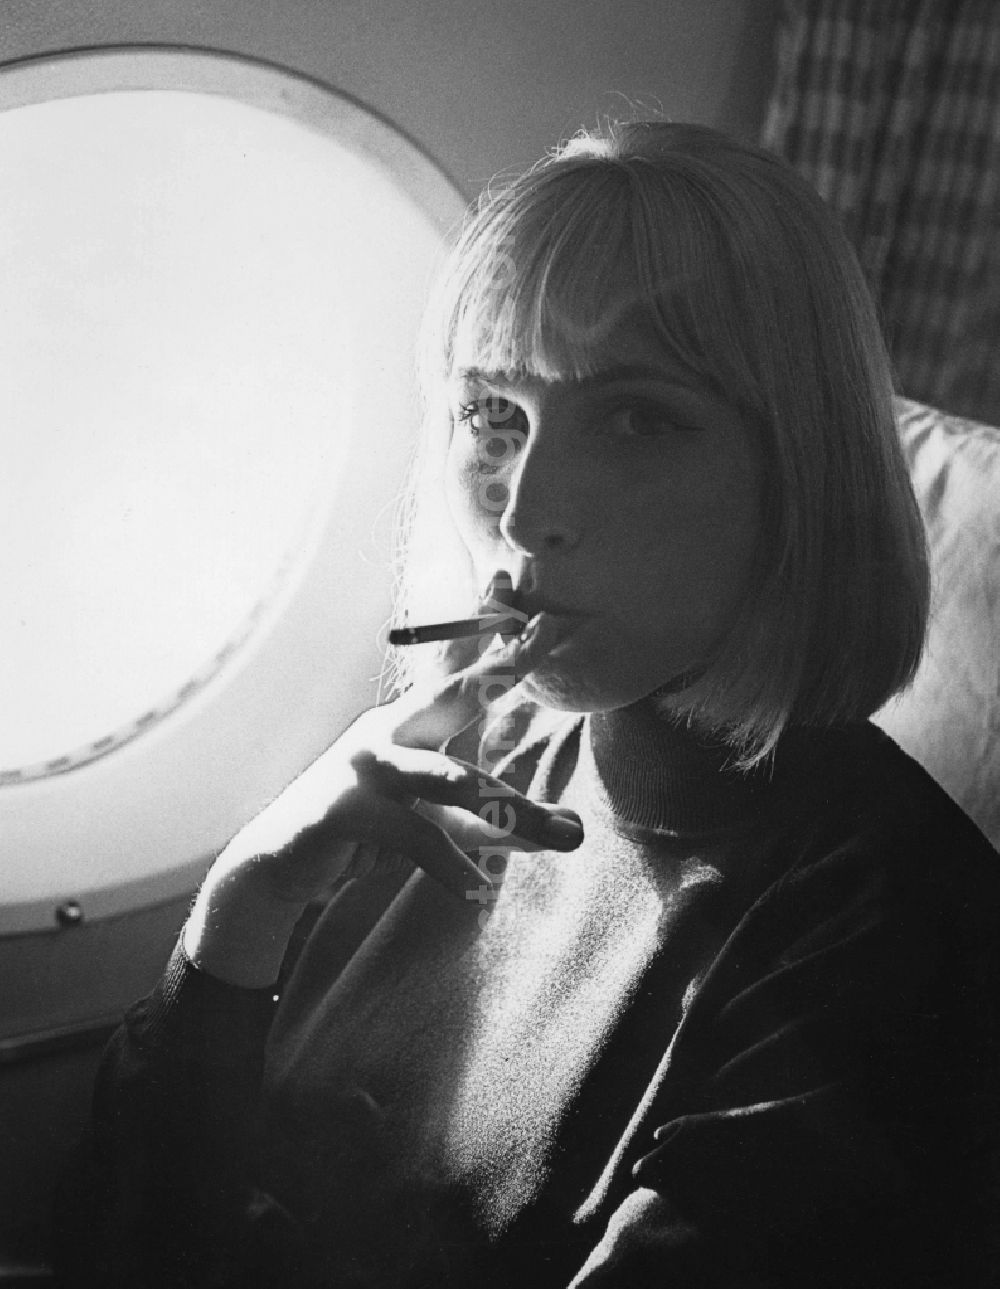 GDR picture archive: Schönefeld - Vera Oelschlegel, a German singer, actress, director, professor and theater director sitting in an airplane and smokes